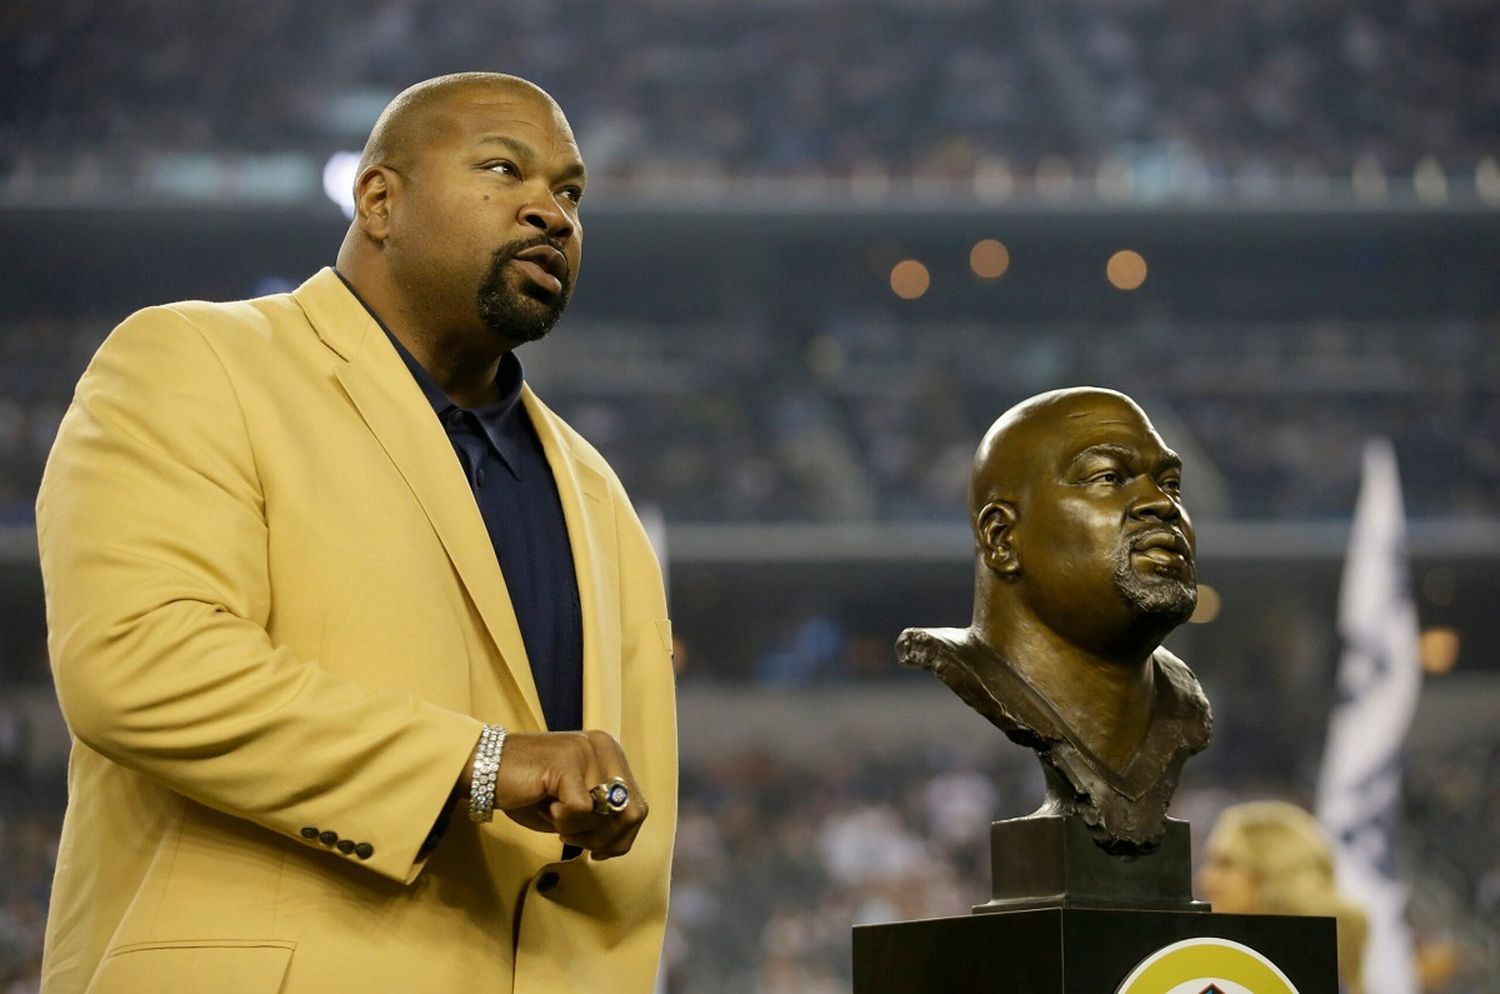 Larry Allen, a legendary offensive lineman for the Dallas Cowboys, passed away at 52, leaving a lasting legacy in the NFL.